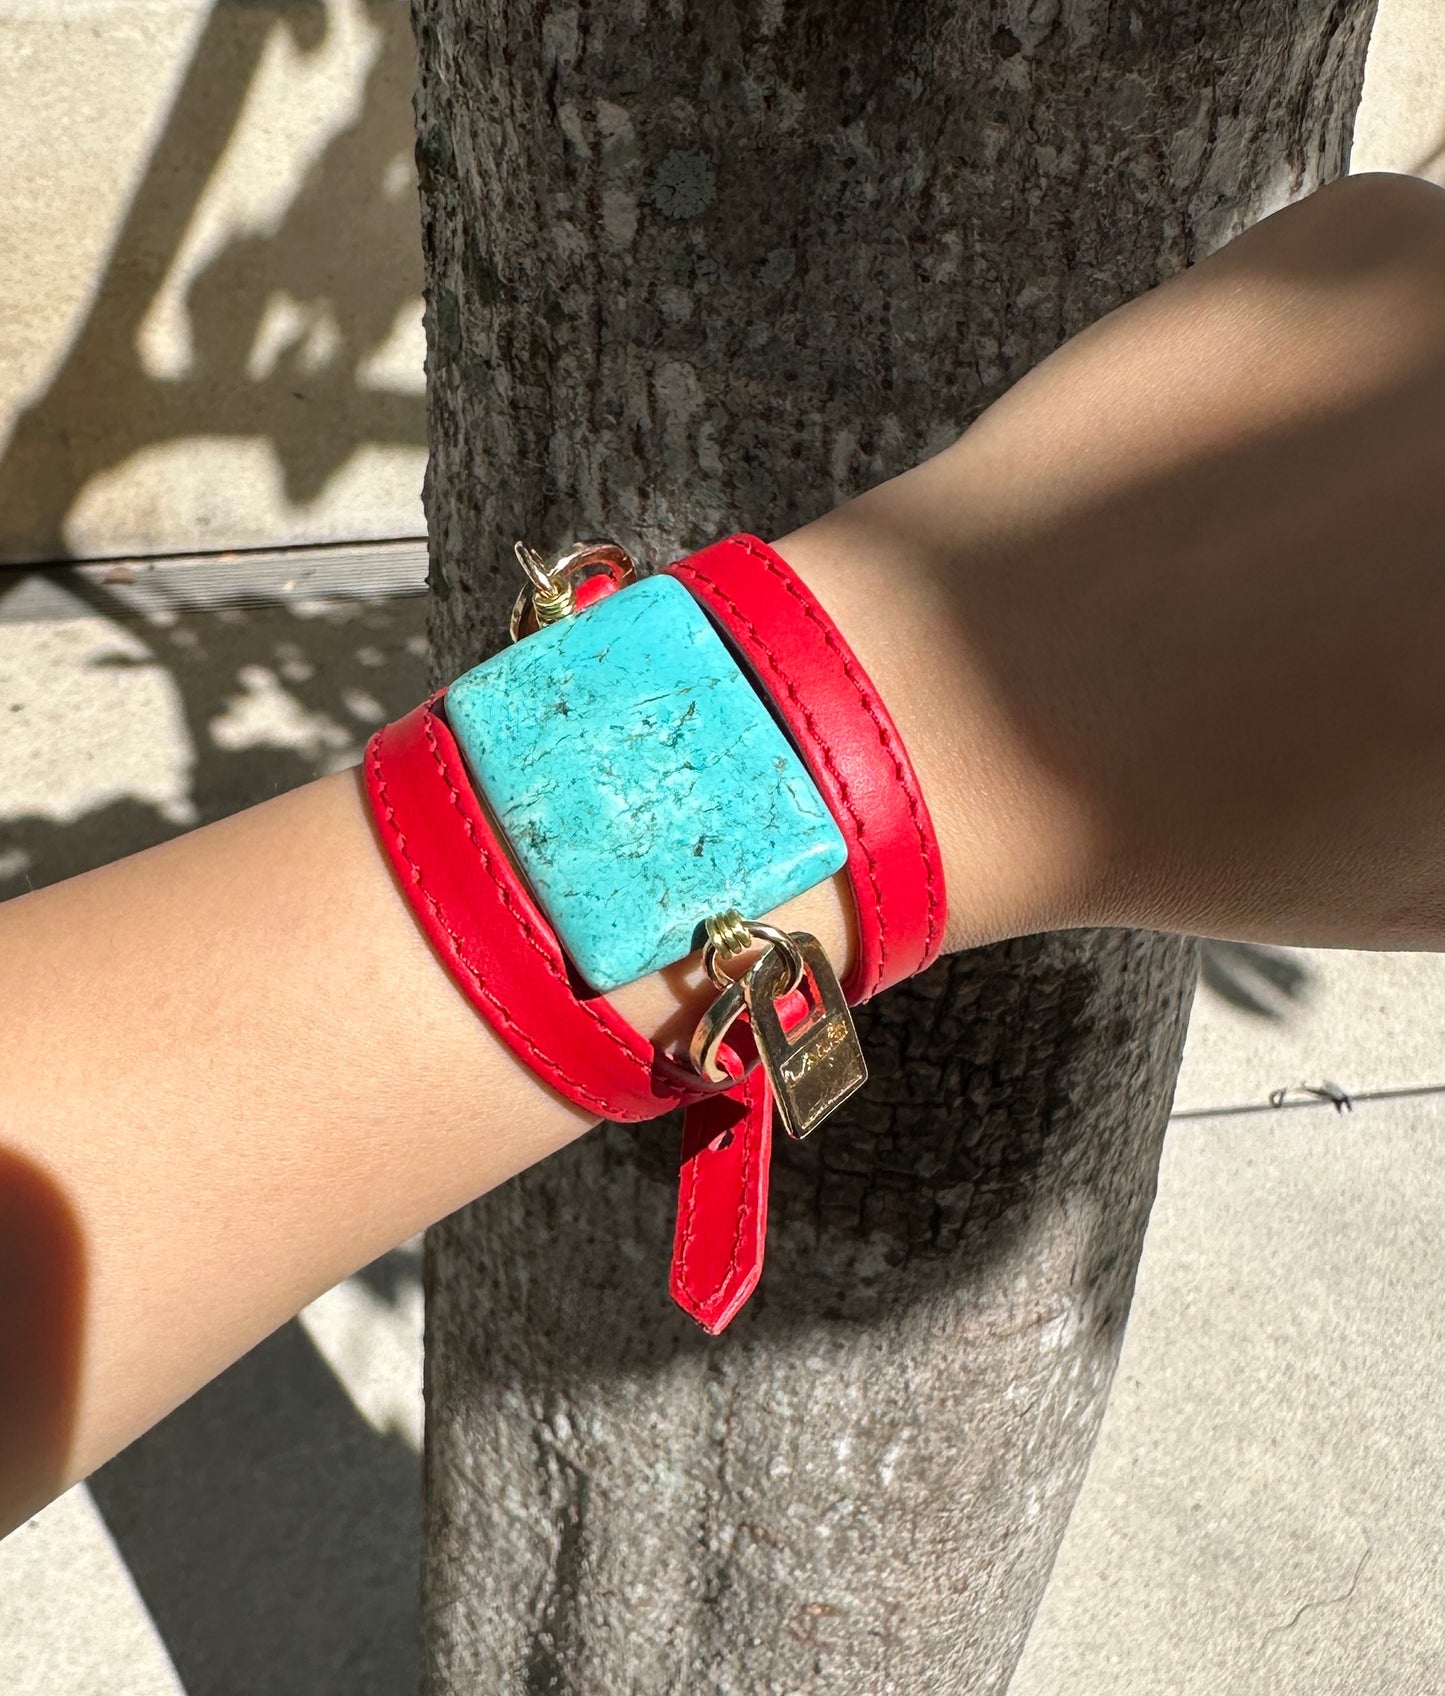 Handcrafted Red Leather Bracelet with Turquoise Stone | Unique Gift Idea - LALEBRACELETS